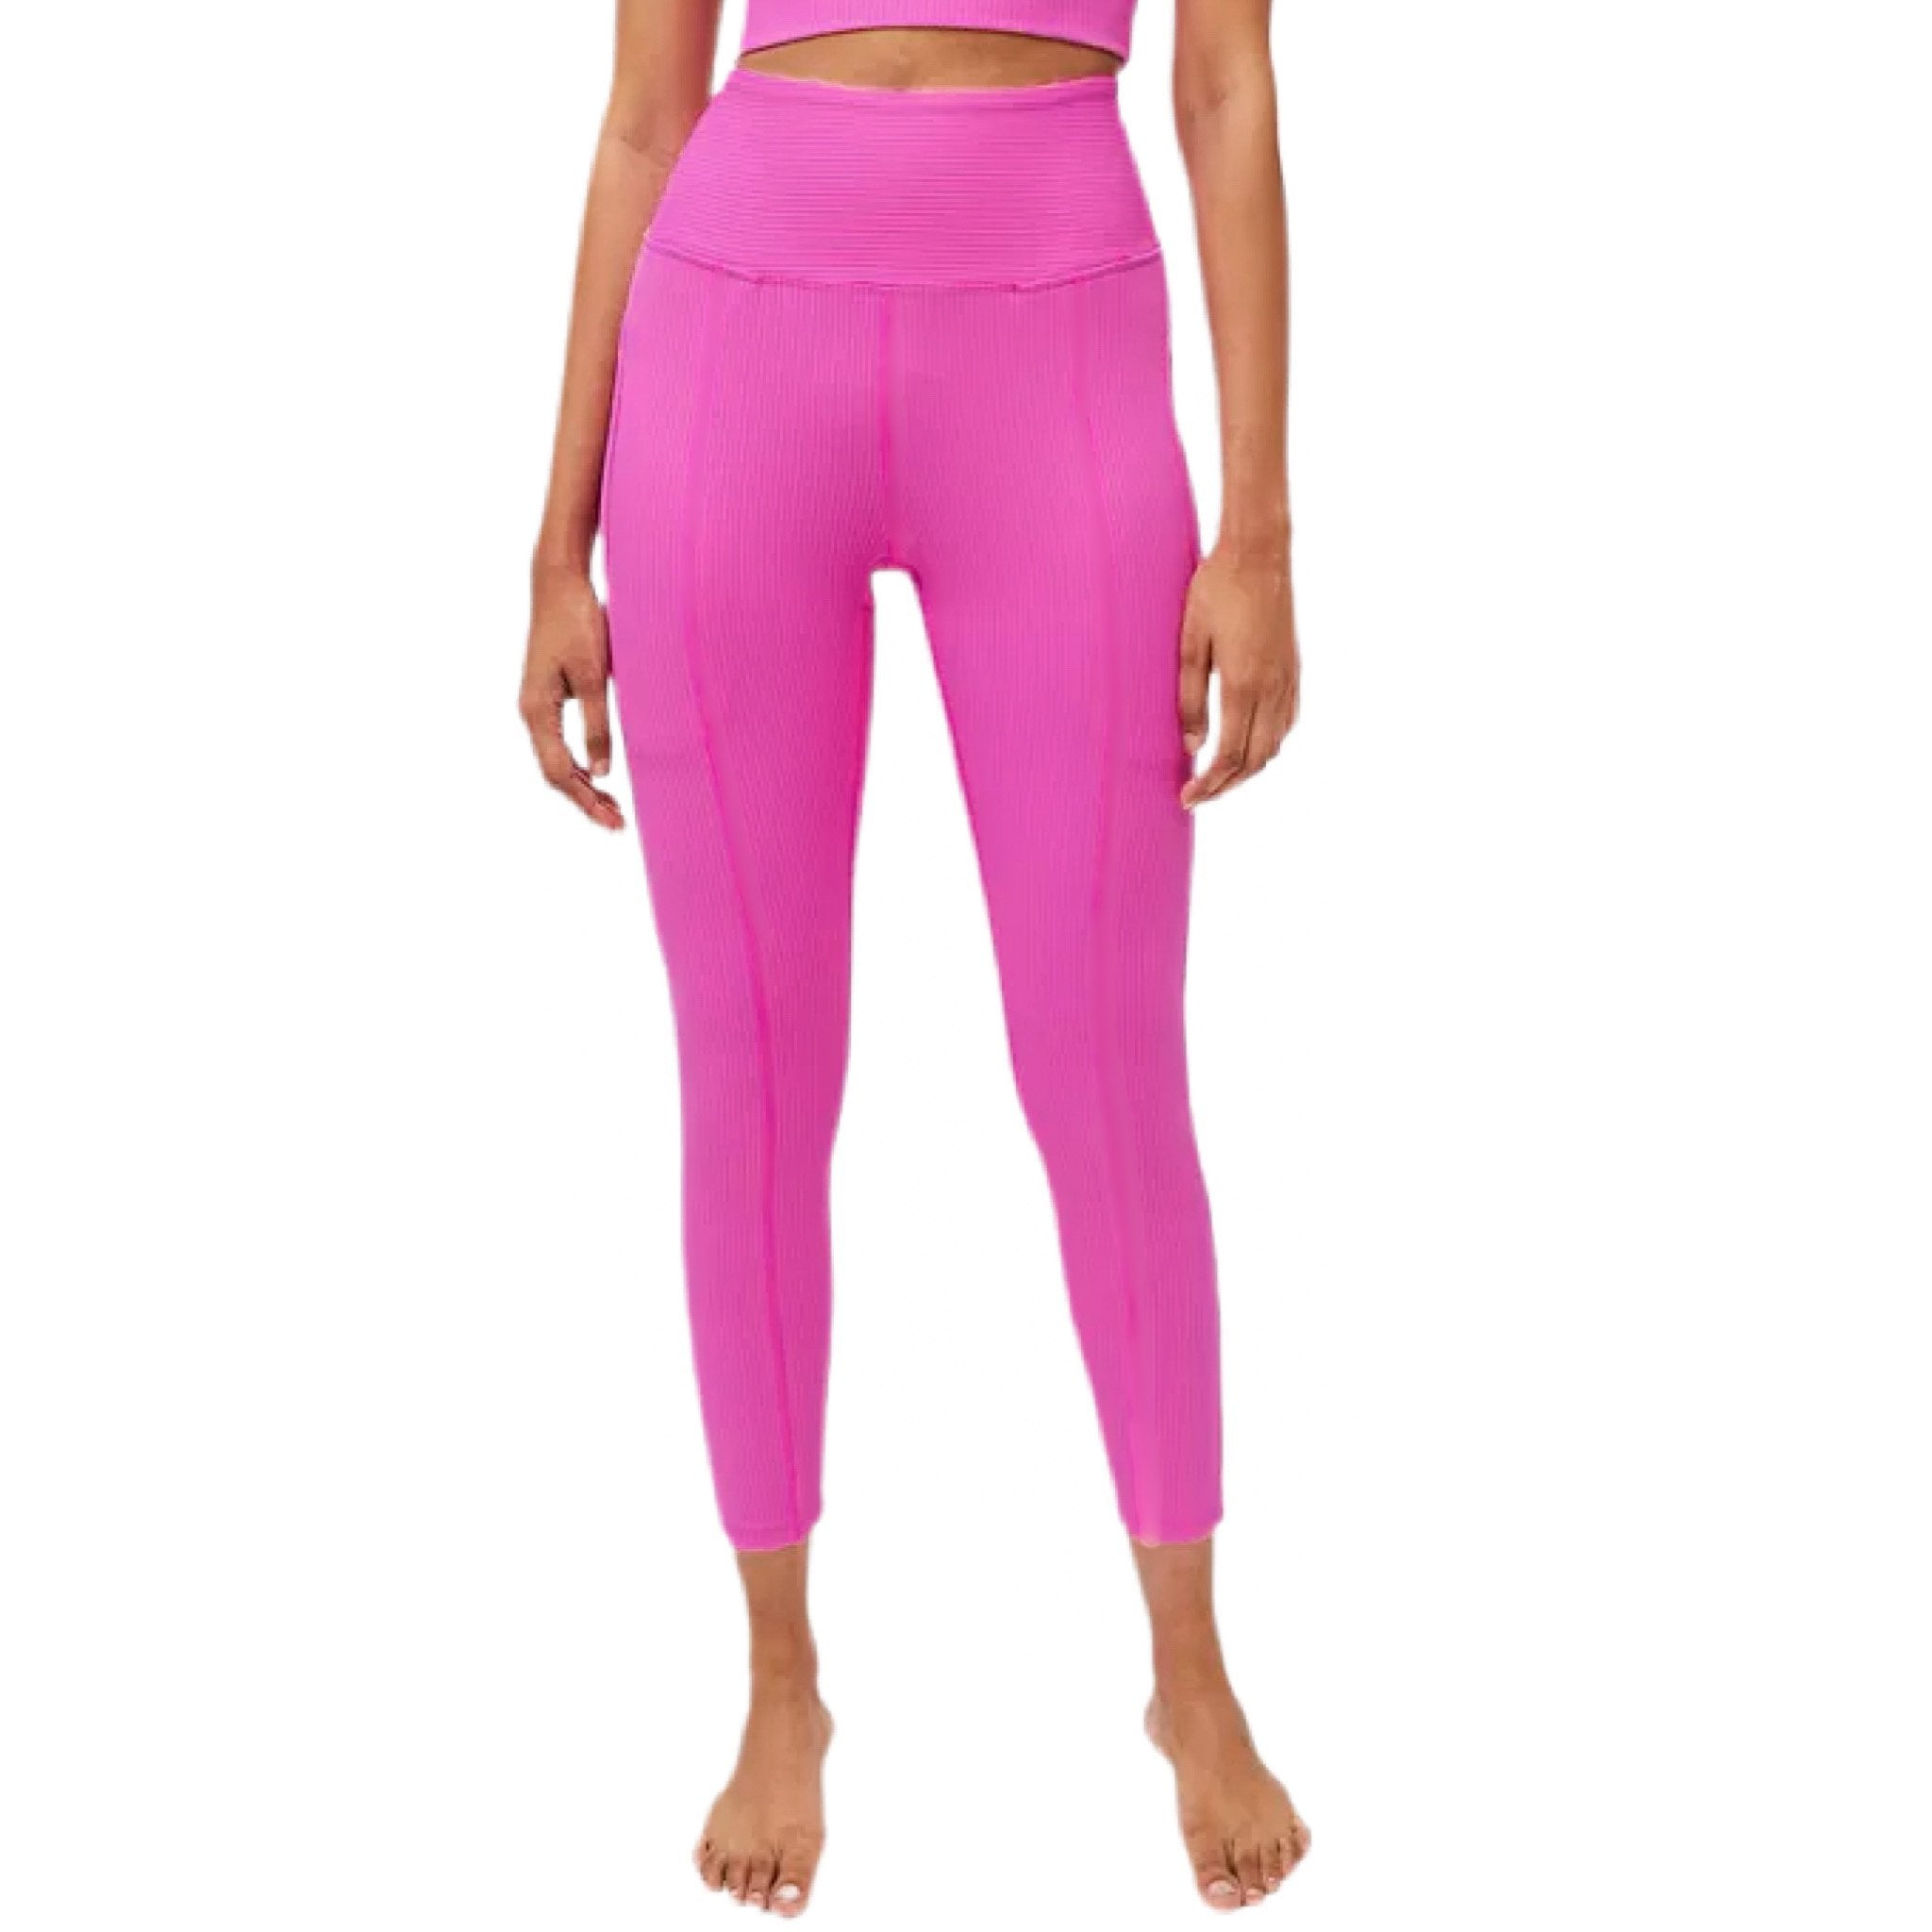 Year of Ours Outdoors Legging - Rose Violet - Safe & Chic